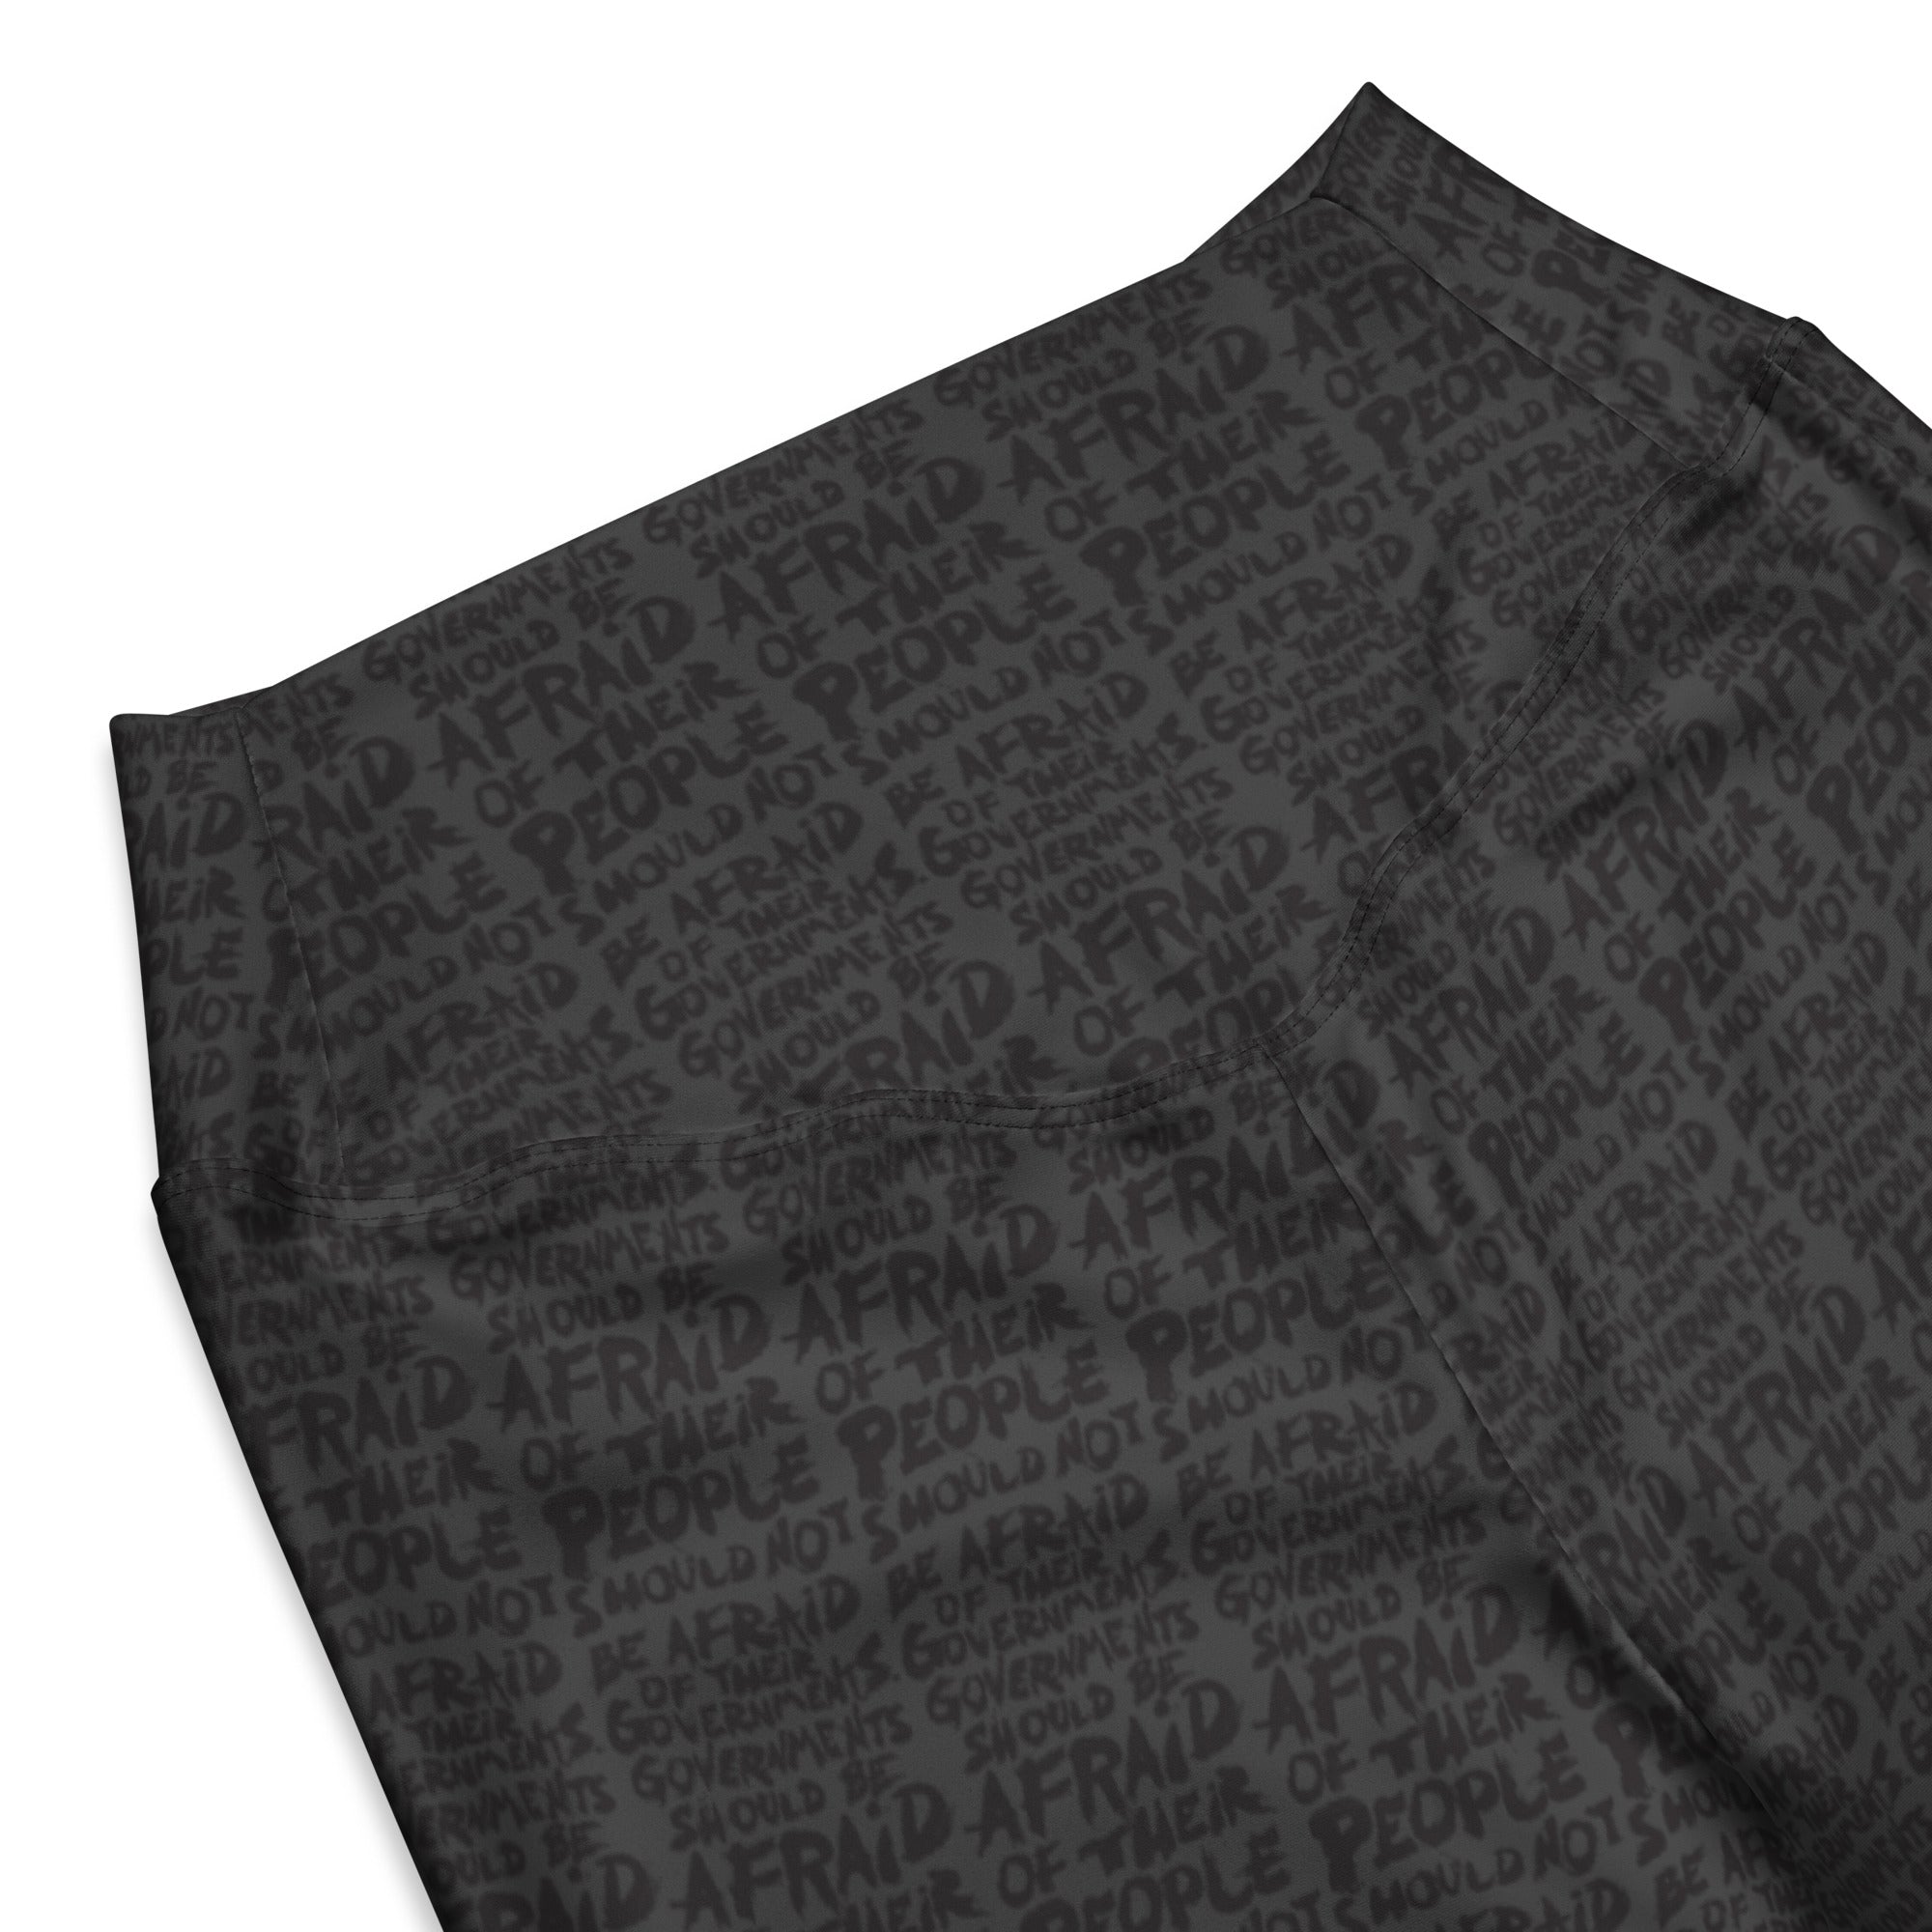 People Should Not Be Afraid of Their Governments Jefferson Quote High-Waist Flare Leggings